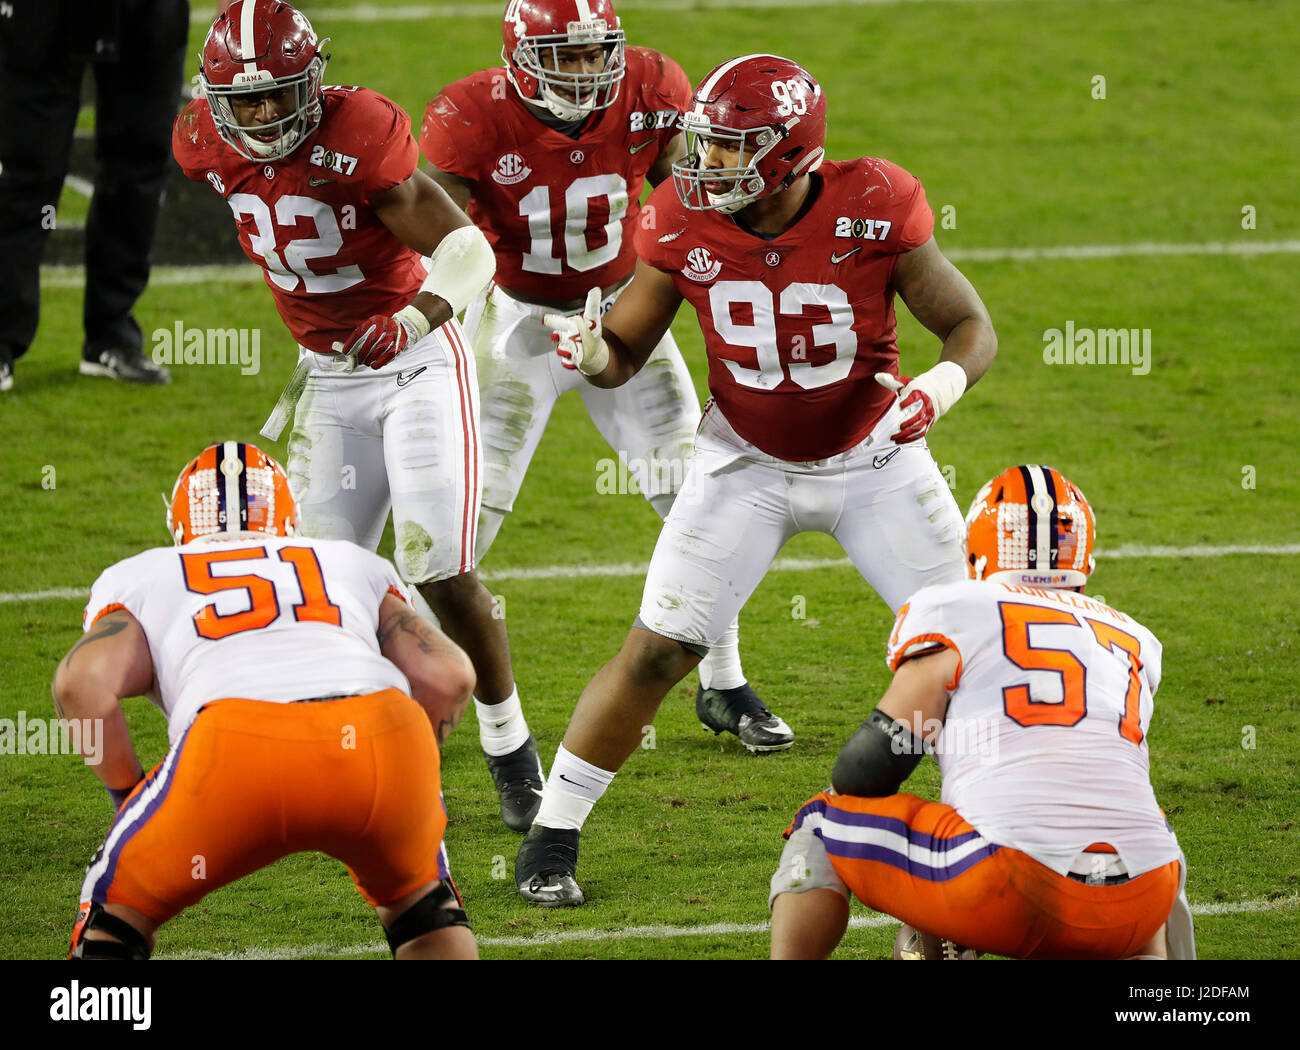 January, 9 2017 Tampa, FL.Alabama Crimson Tide defensive lineman (93) Jonathan Allen, (10) Reuben Foster, and (32) Rashaan Evans in action during the National Championship college football game between the Clemson Tigers, and Alabama Crimson Tide, on January 9, 2017. The Clemson Tigers beat the Alabama Crimson Tide 35-31 at Raymond James Stadium for the National Title, in Tampa, FL. (Absolute Complete Photographer & Company Credit: Jose/MarinMedia.org/Cal Sport Media) (Network Television please contact your Sales Representative for Television usage.) (Television news usage must over-burn Stock Photo